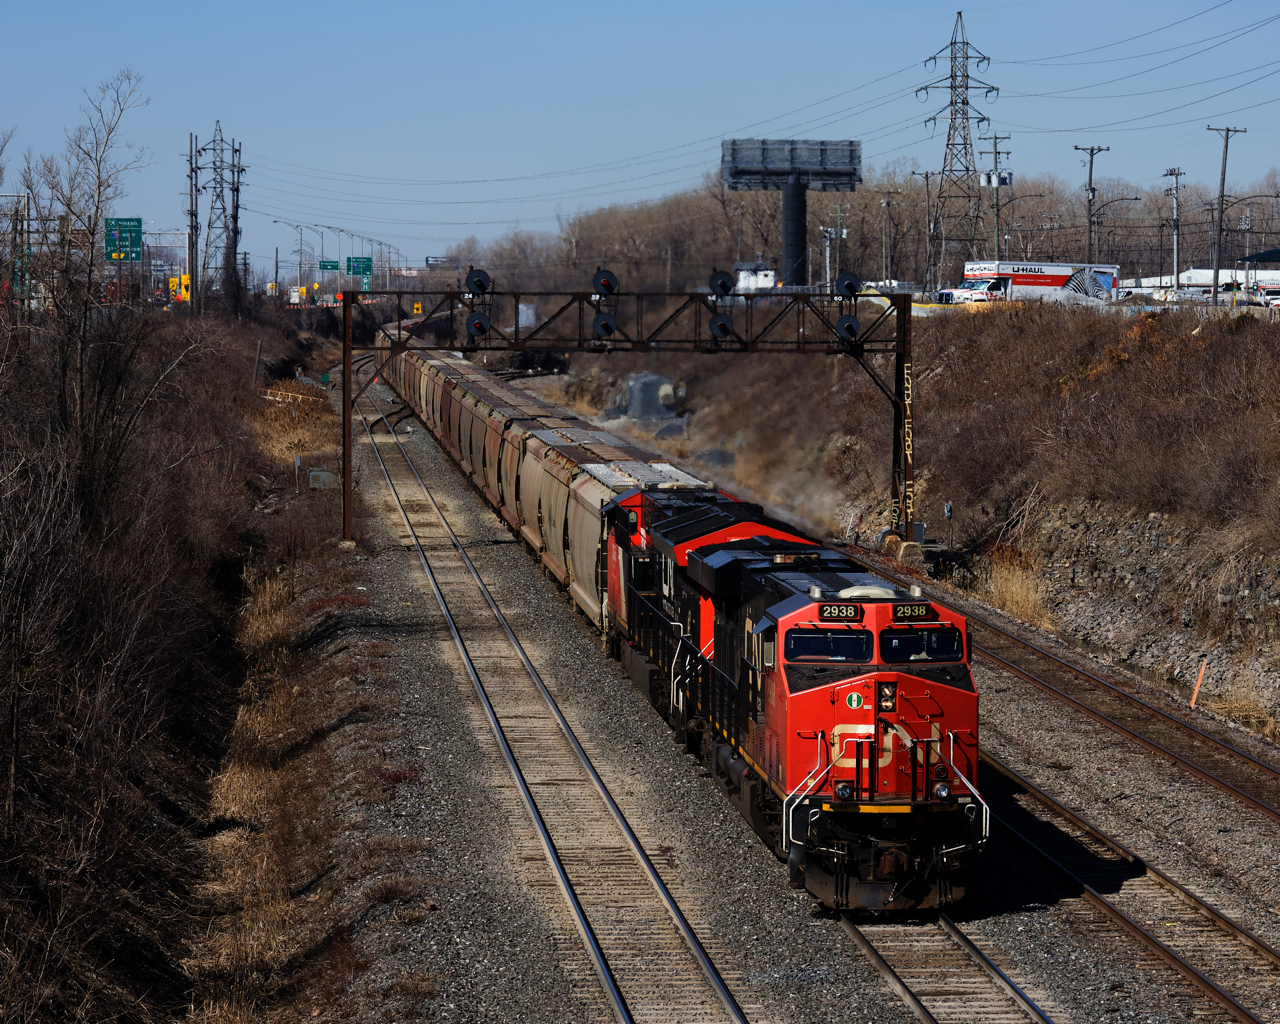 CN B730 has about 30,000 tons of potash for Saint John, New Brunswick as it passes underneath a vintage signal bridge. VIA 65 is lined on the south track and will pass underneath me a split second after this photo was taken.